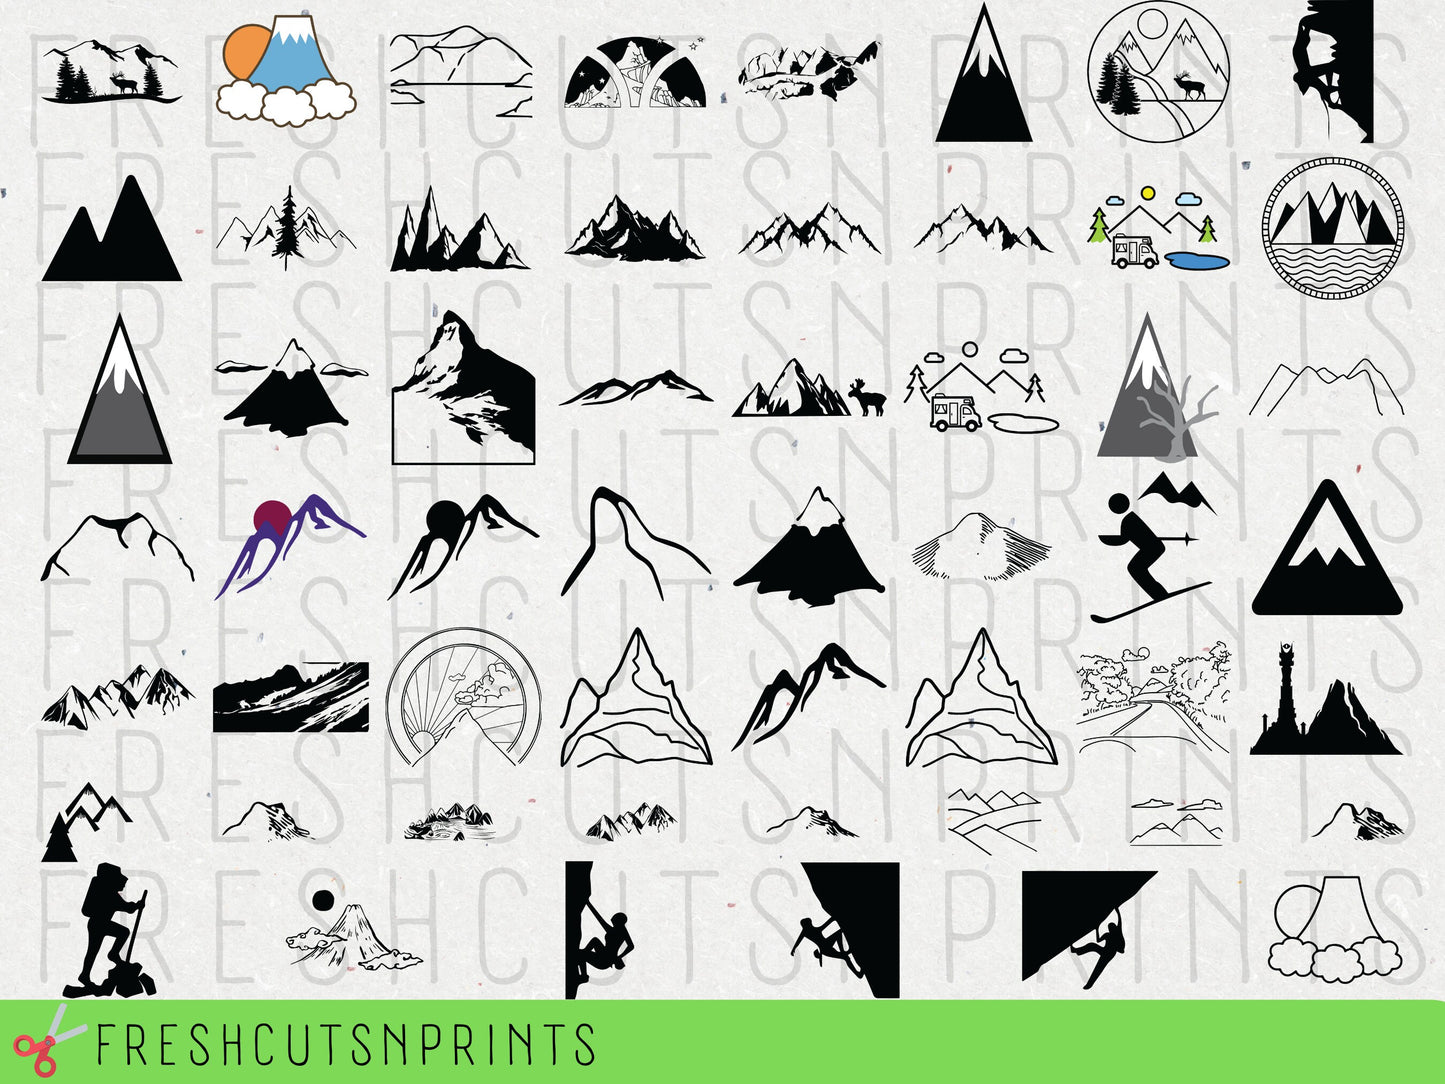 50+ Mountain SVG Bundle , Mountain clipart, Mountain Cut file, Mountain Silhouette, Mountain Vector, Mountain Decal, Hiking svg, camping svg